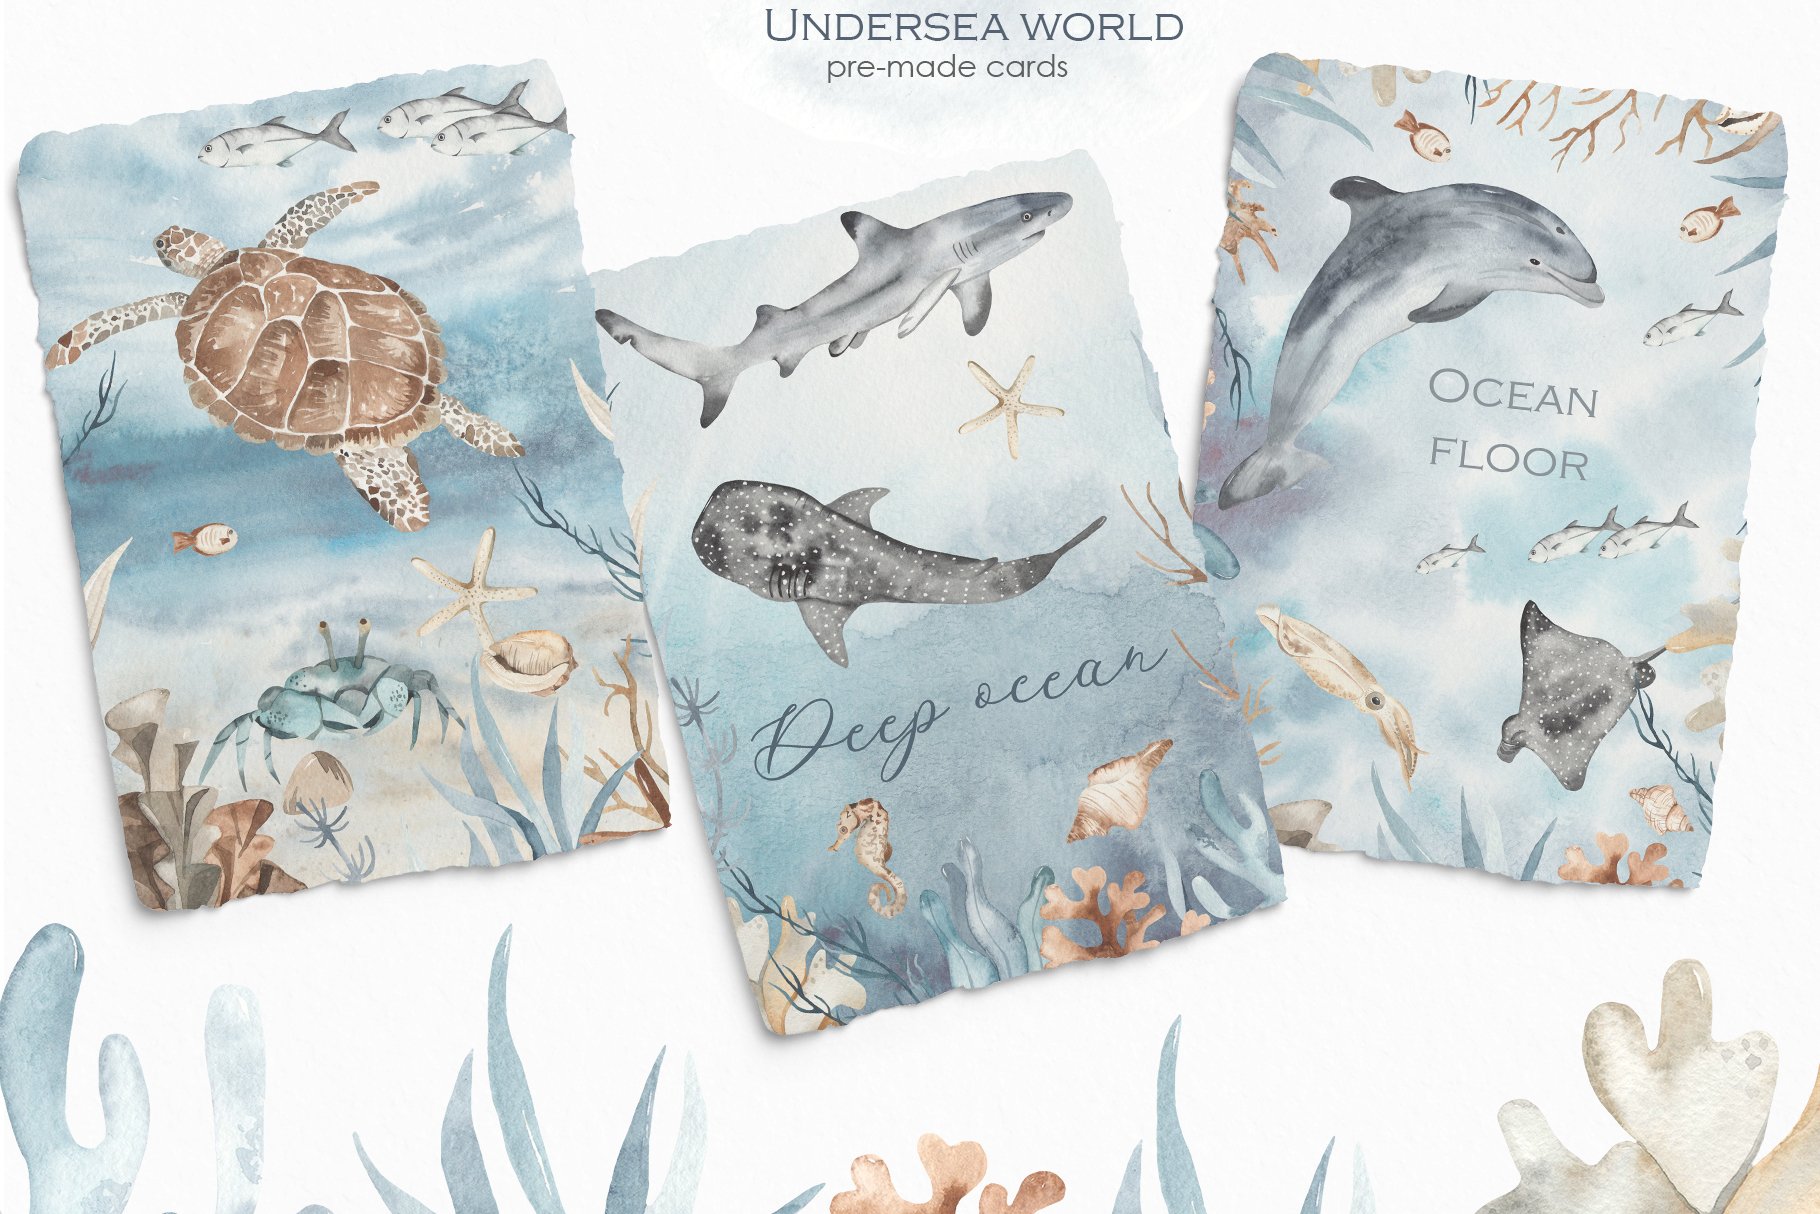 7 watercolor underwater world pre made cards 136